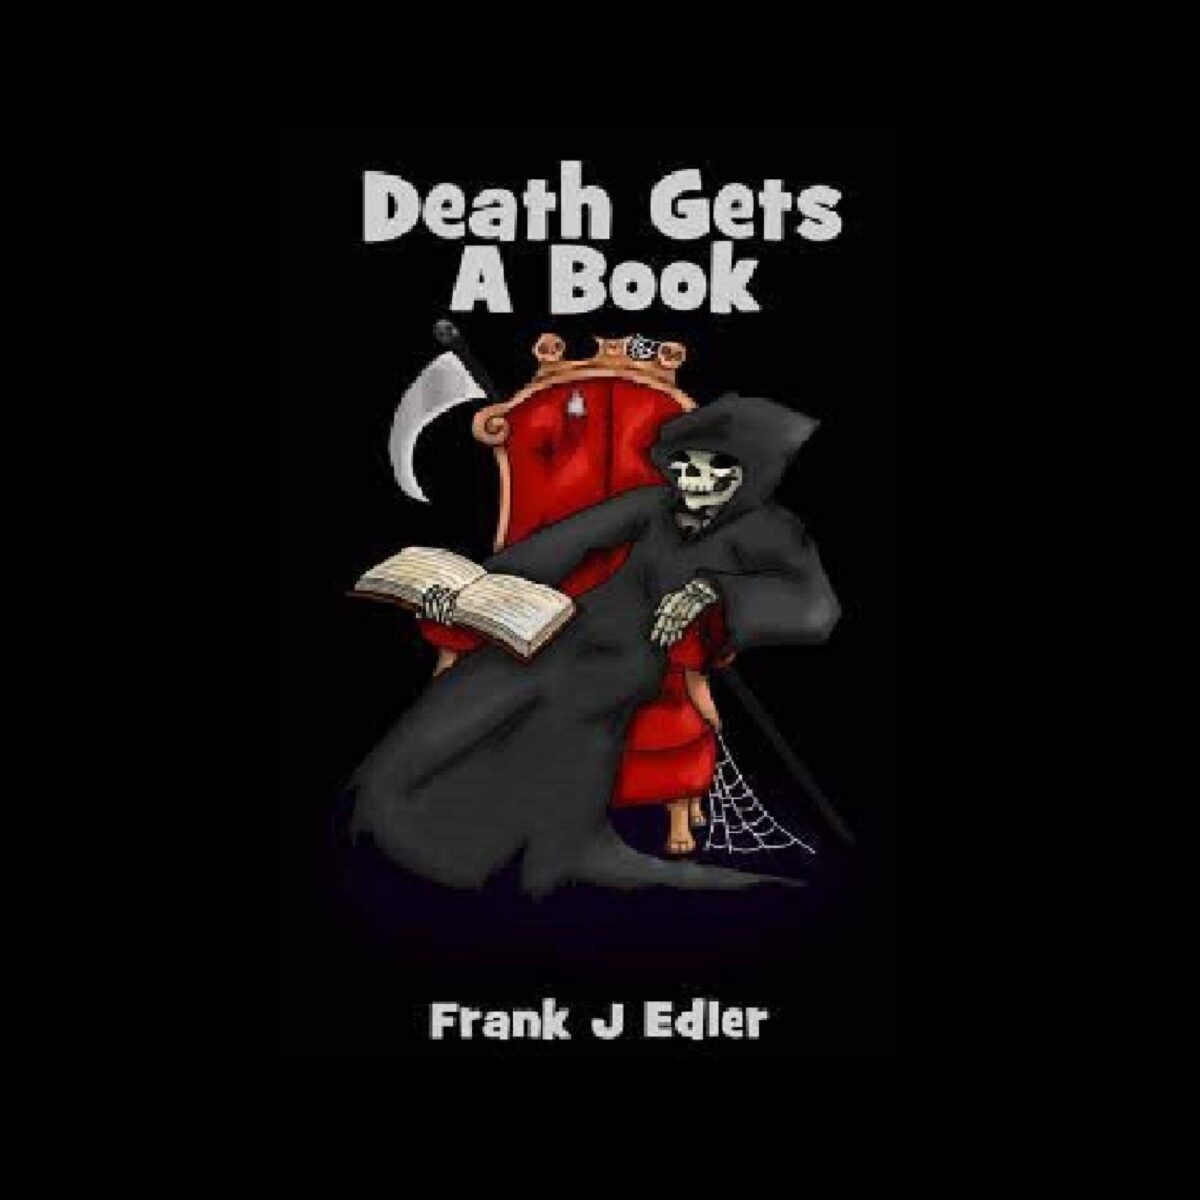 Death Gets a Book